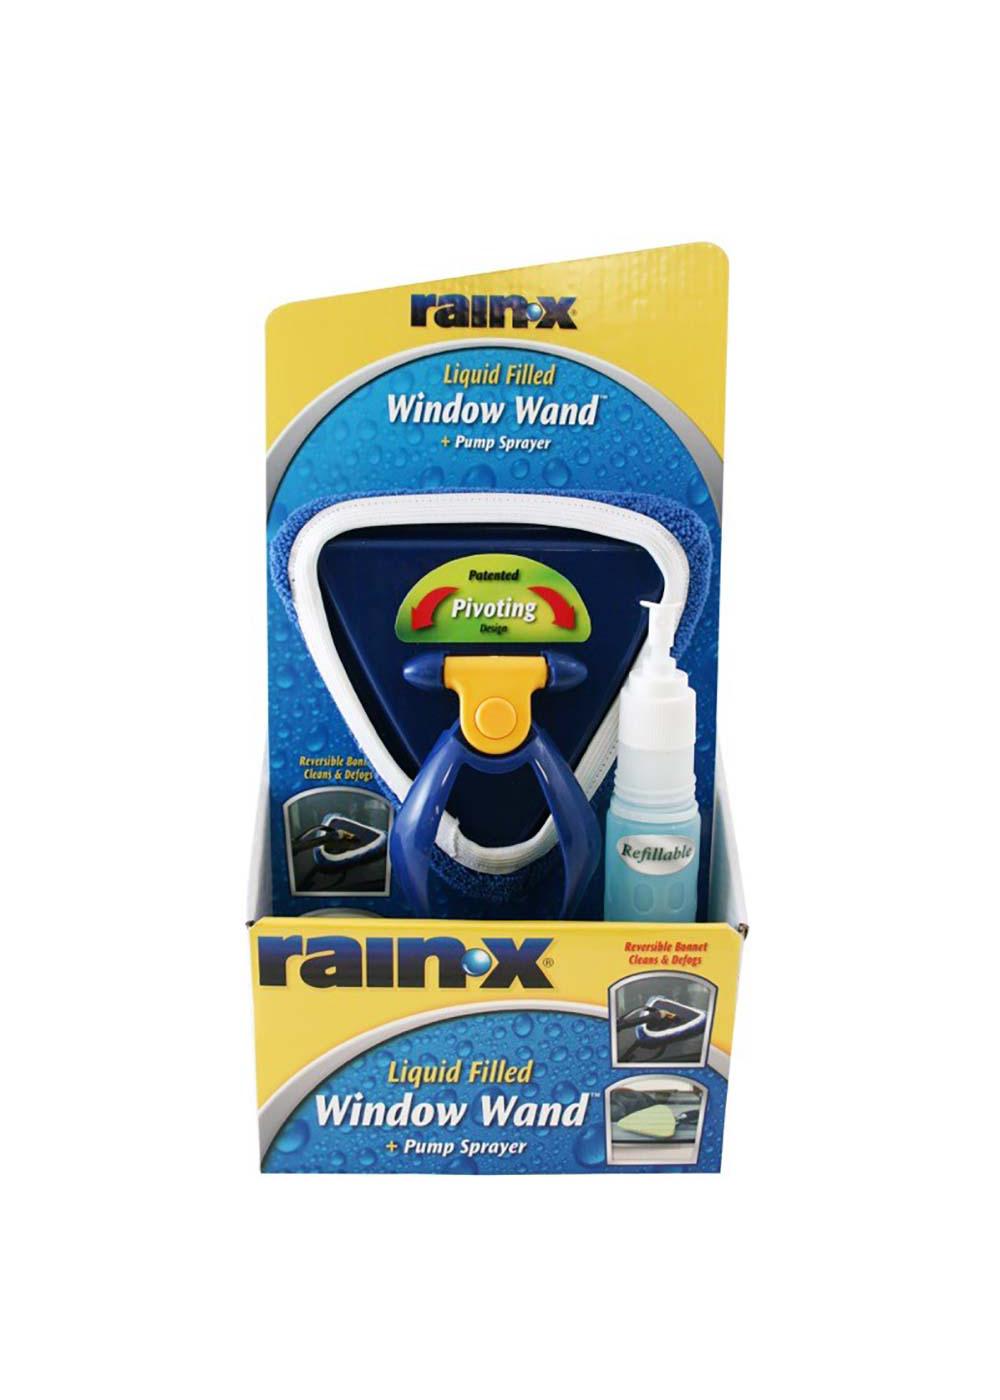 Rain-X Liquid Filled Glass Cleaning Window Wand with Bonnet, Refillable,  Black & Yellow, 1pk, 9275X 